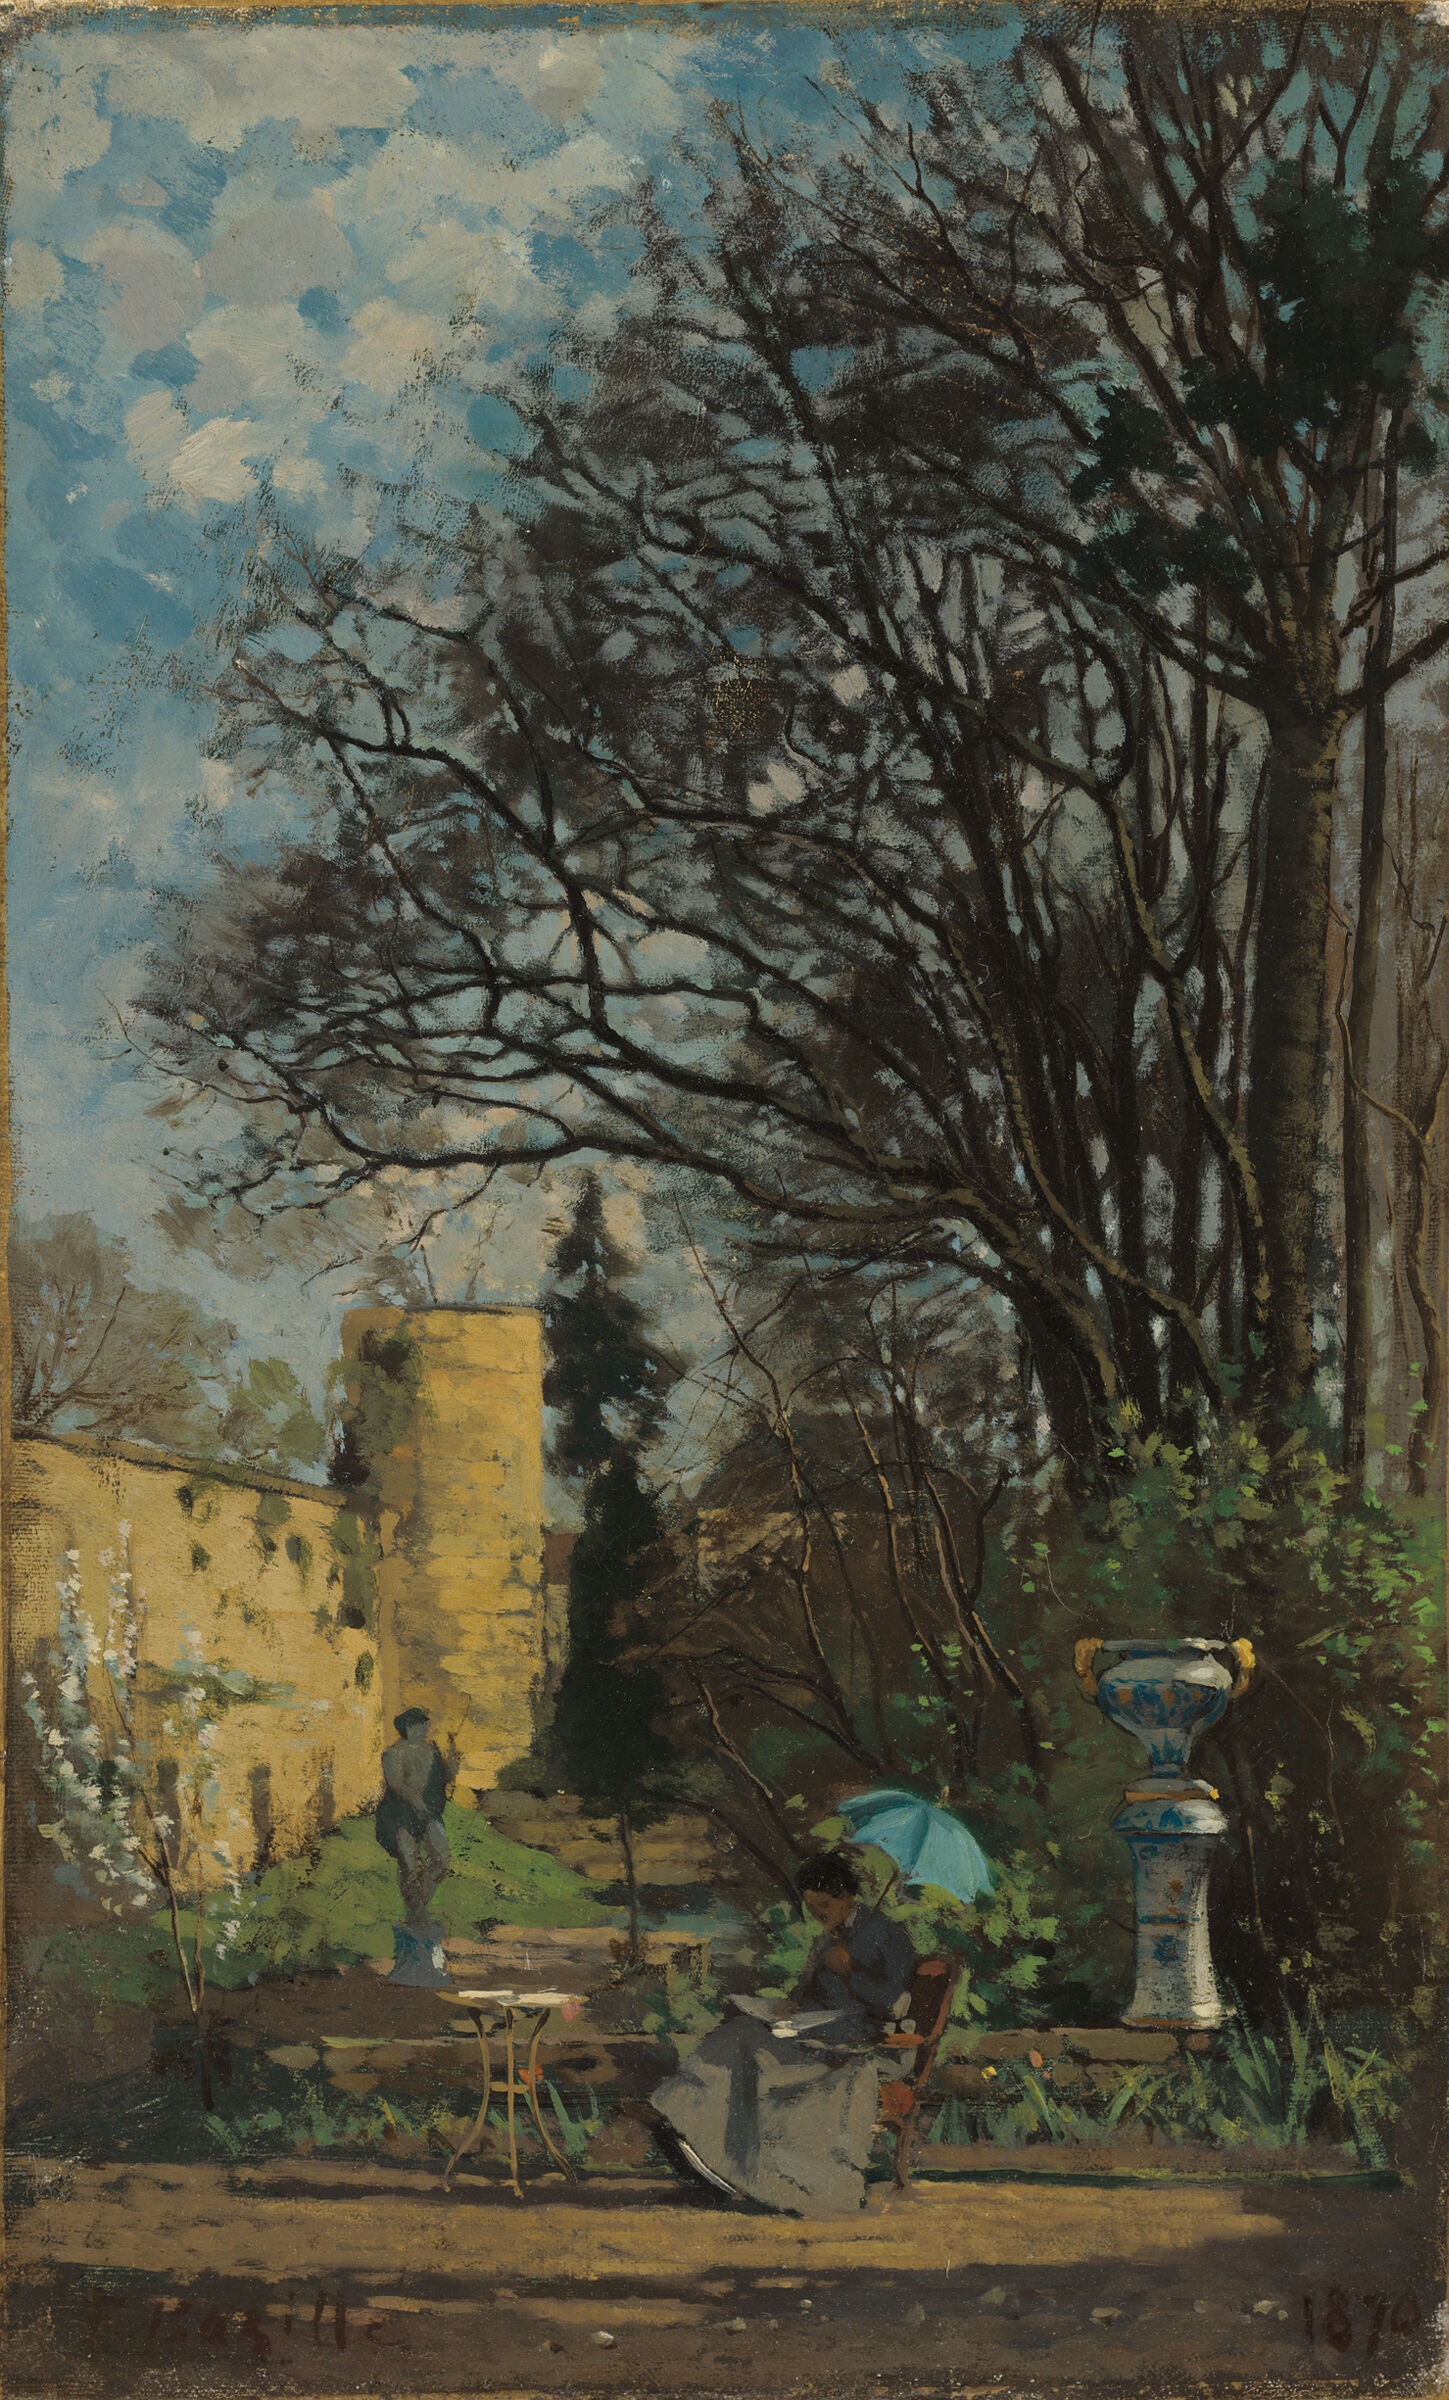 Woman With A Parasol Seated In A Garden